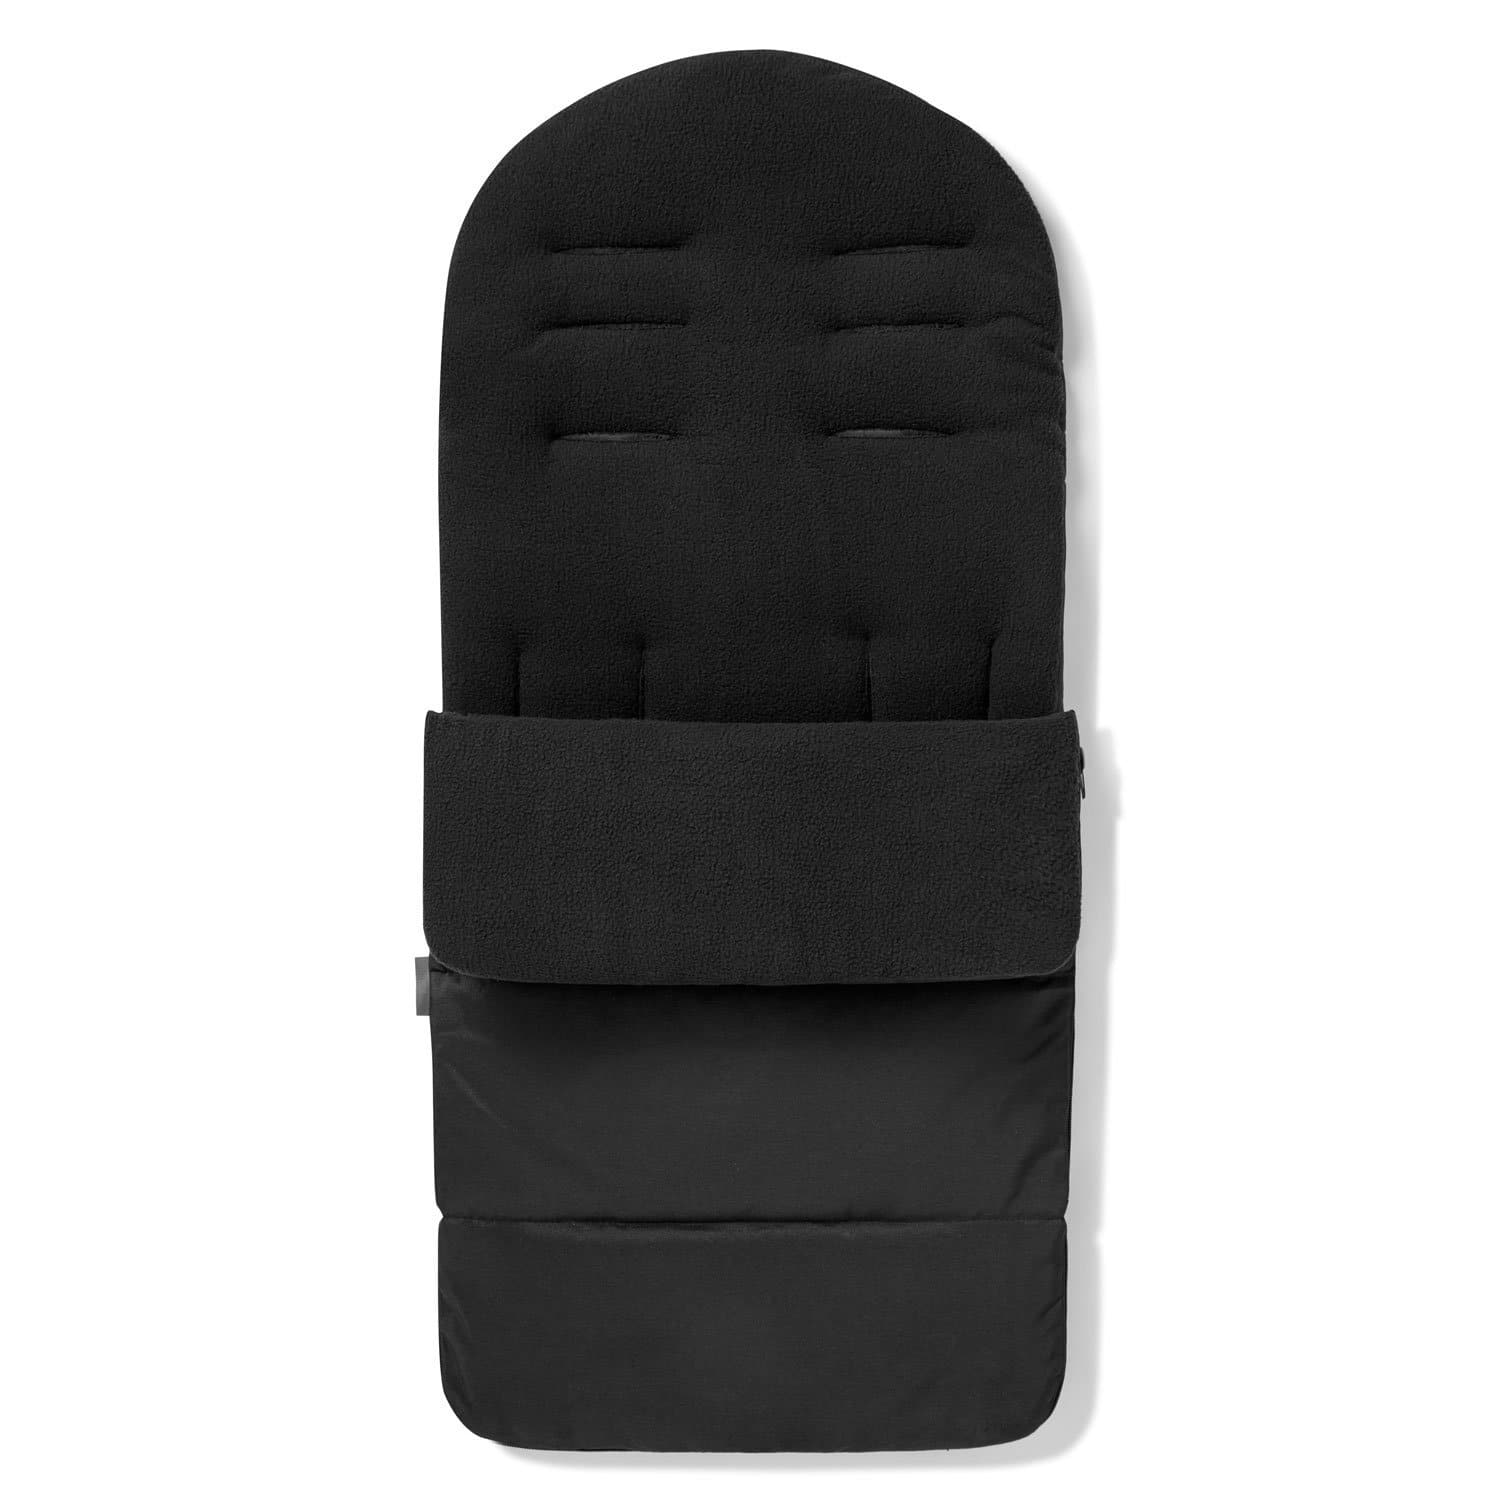 Premium Footmuff / Cosy Toes Compatible with Formula - Black Jack / Fits All Models | For Your Little One